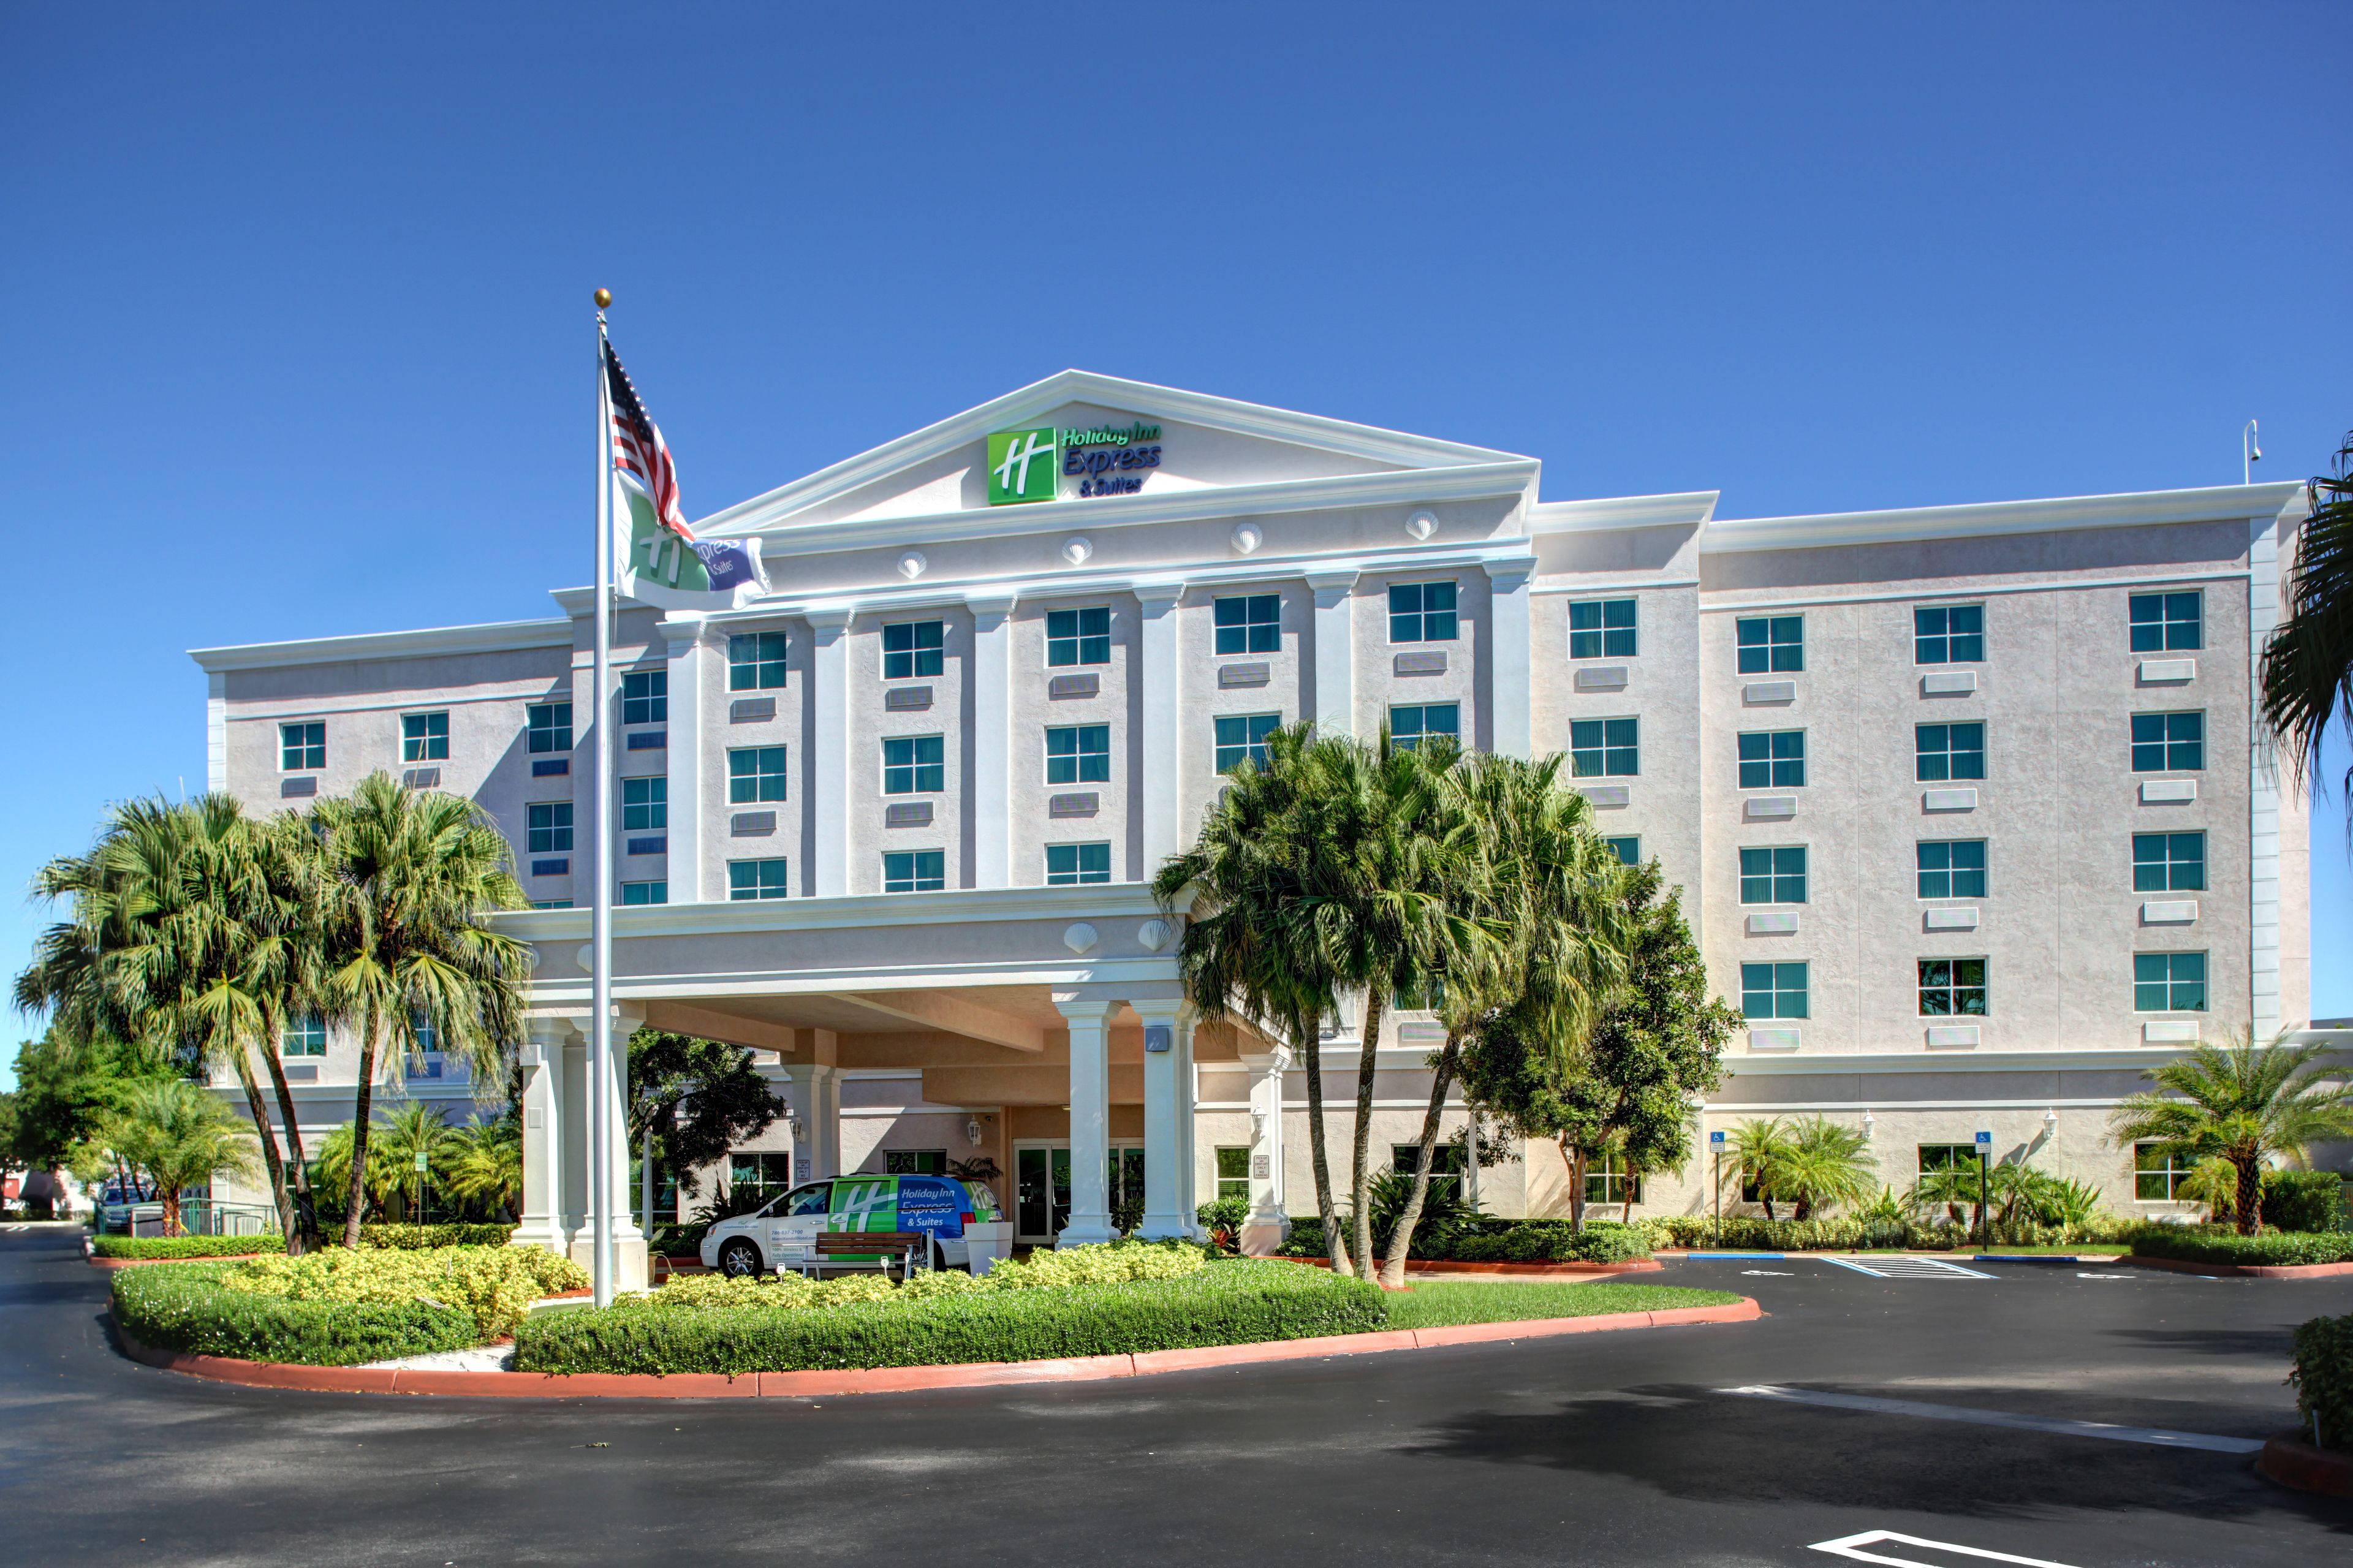 Holiday Inn Express Hotel & Suites Miami-Kendall